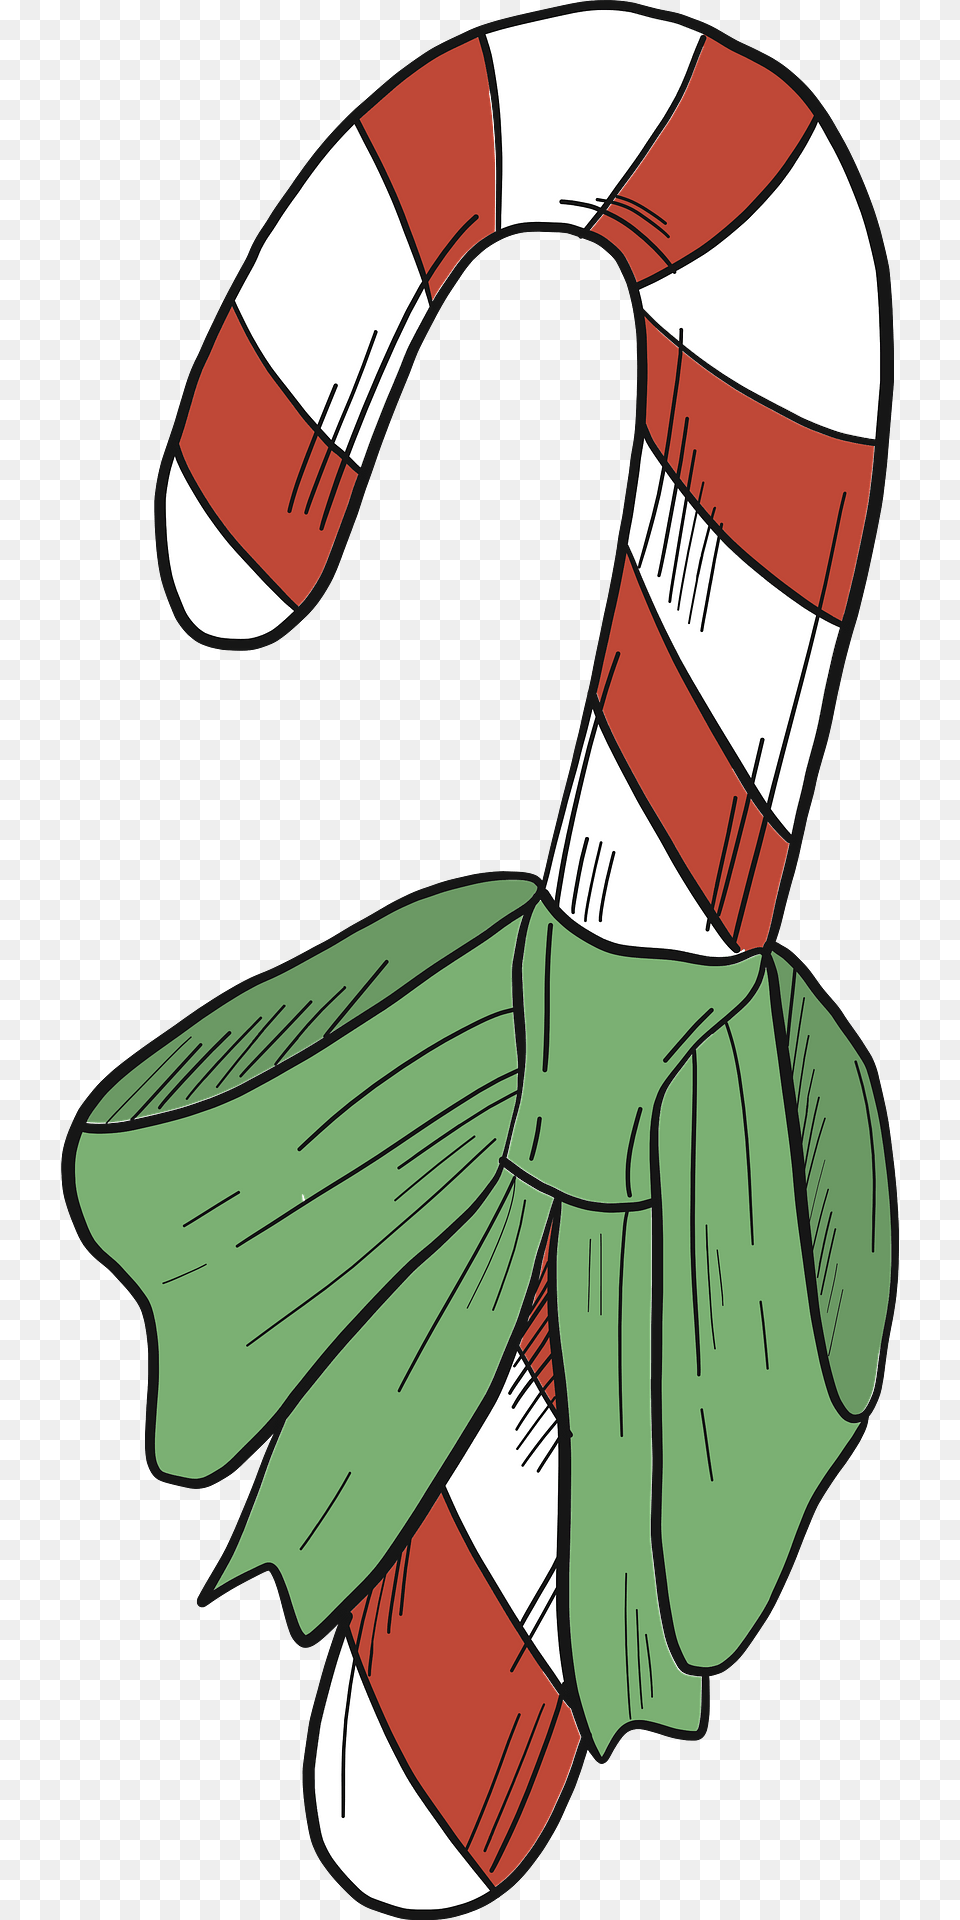 Candy Cane Clipart, Stick Png Image